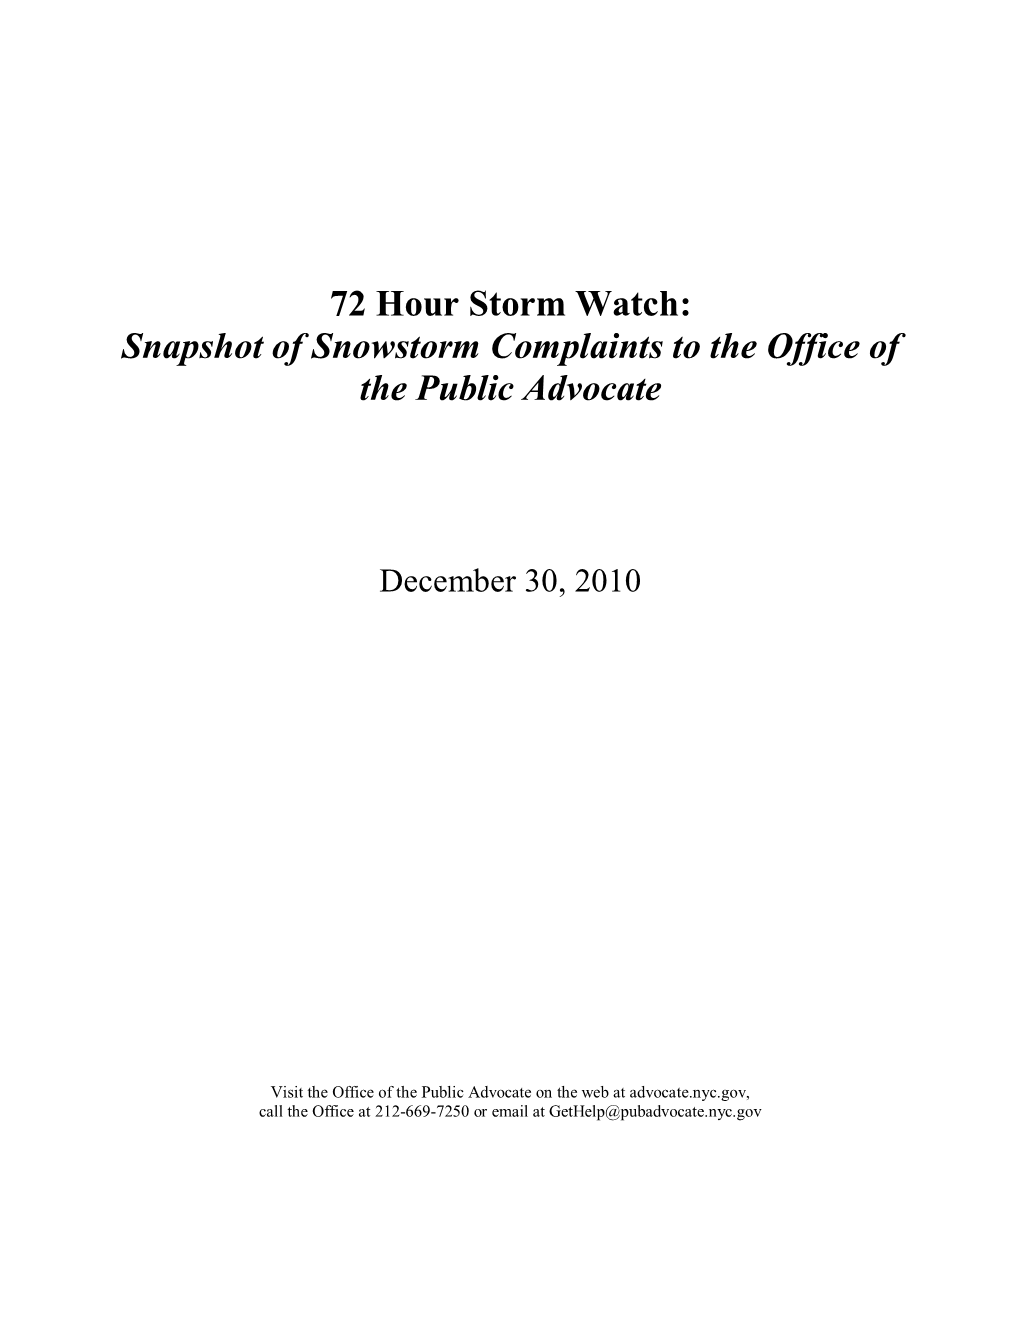 Snapshot of Snowstorm Complaints to the Office of the Public Advocate